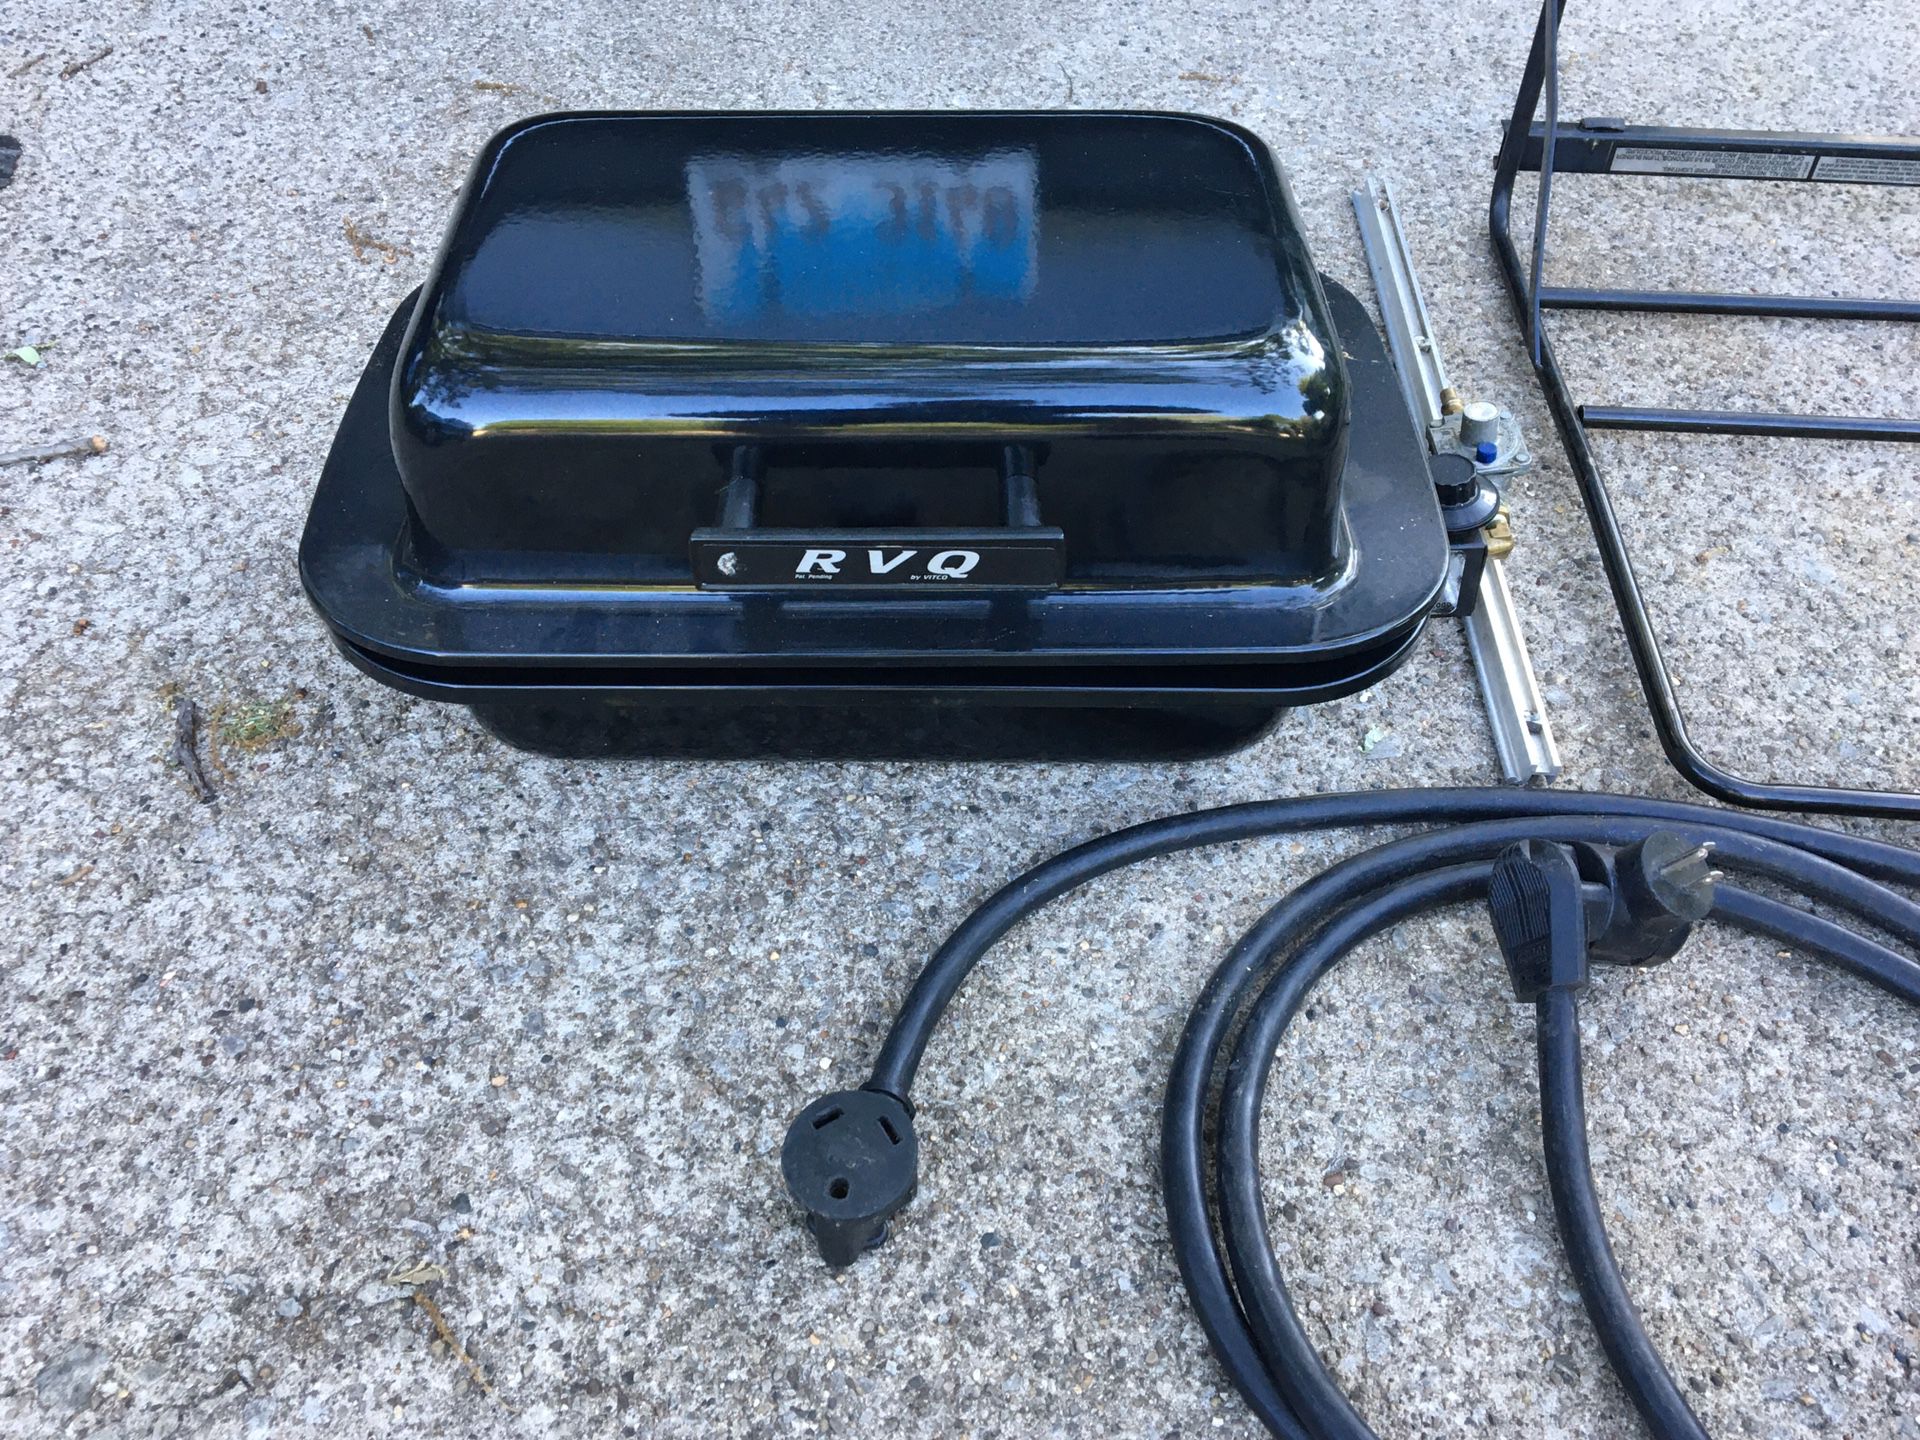 Pop up camper grill and Electric hookup Cord